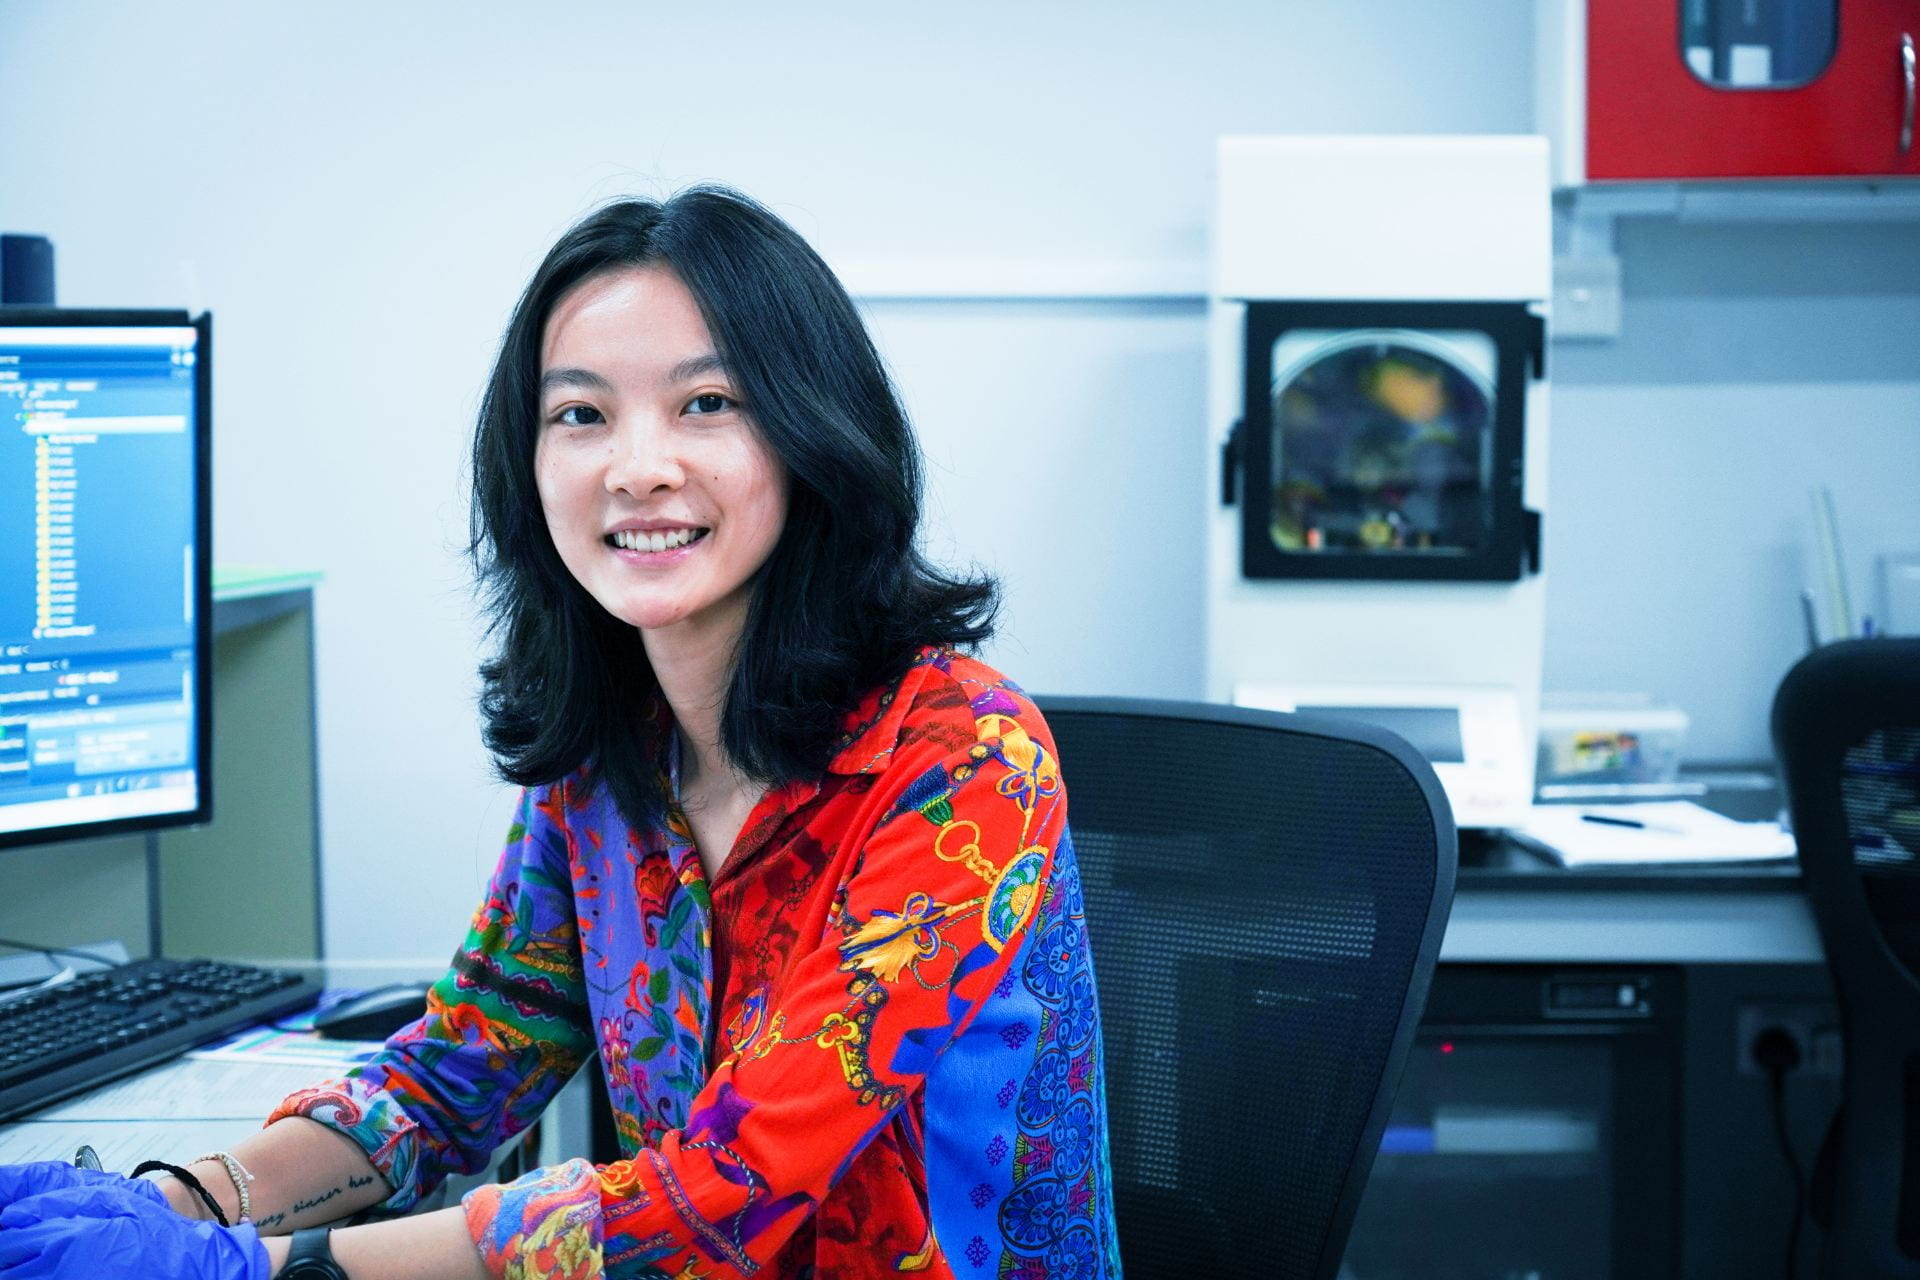 They PhDid It! (Part 1): Dr Weiran Li is turning her interest in volcanoes into a career